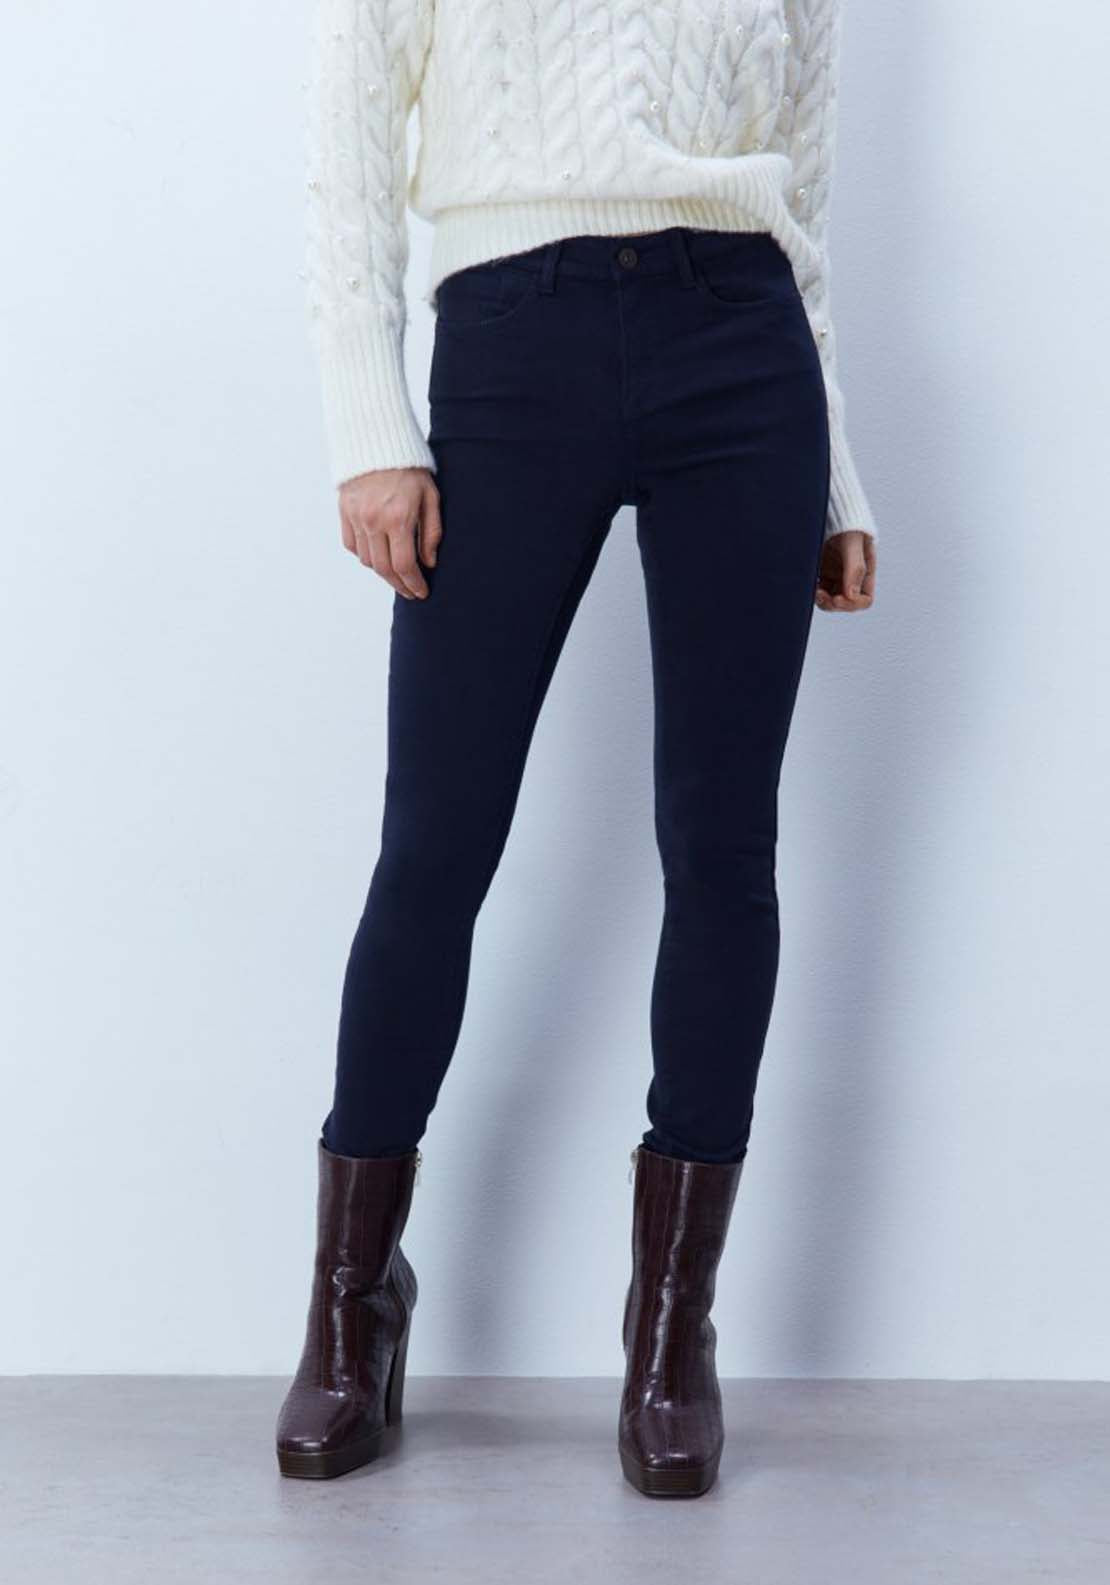 Sfera Coloured skinny jeans 1 Shaws Department Stores